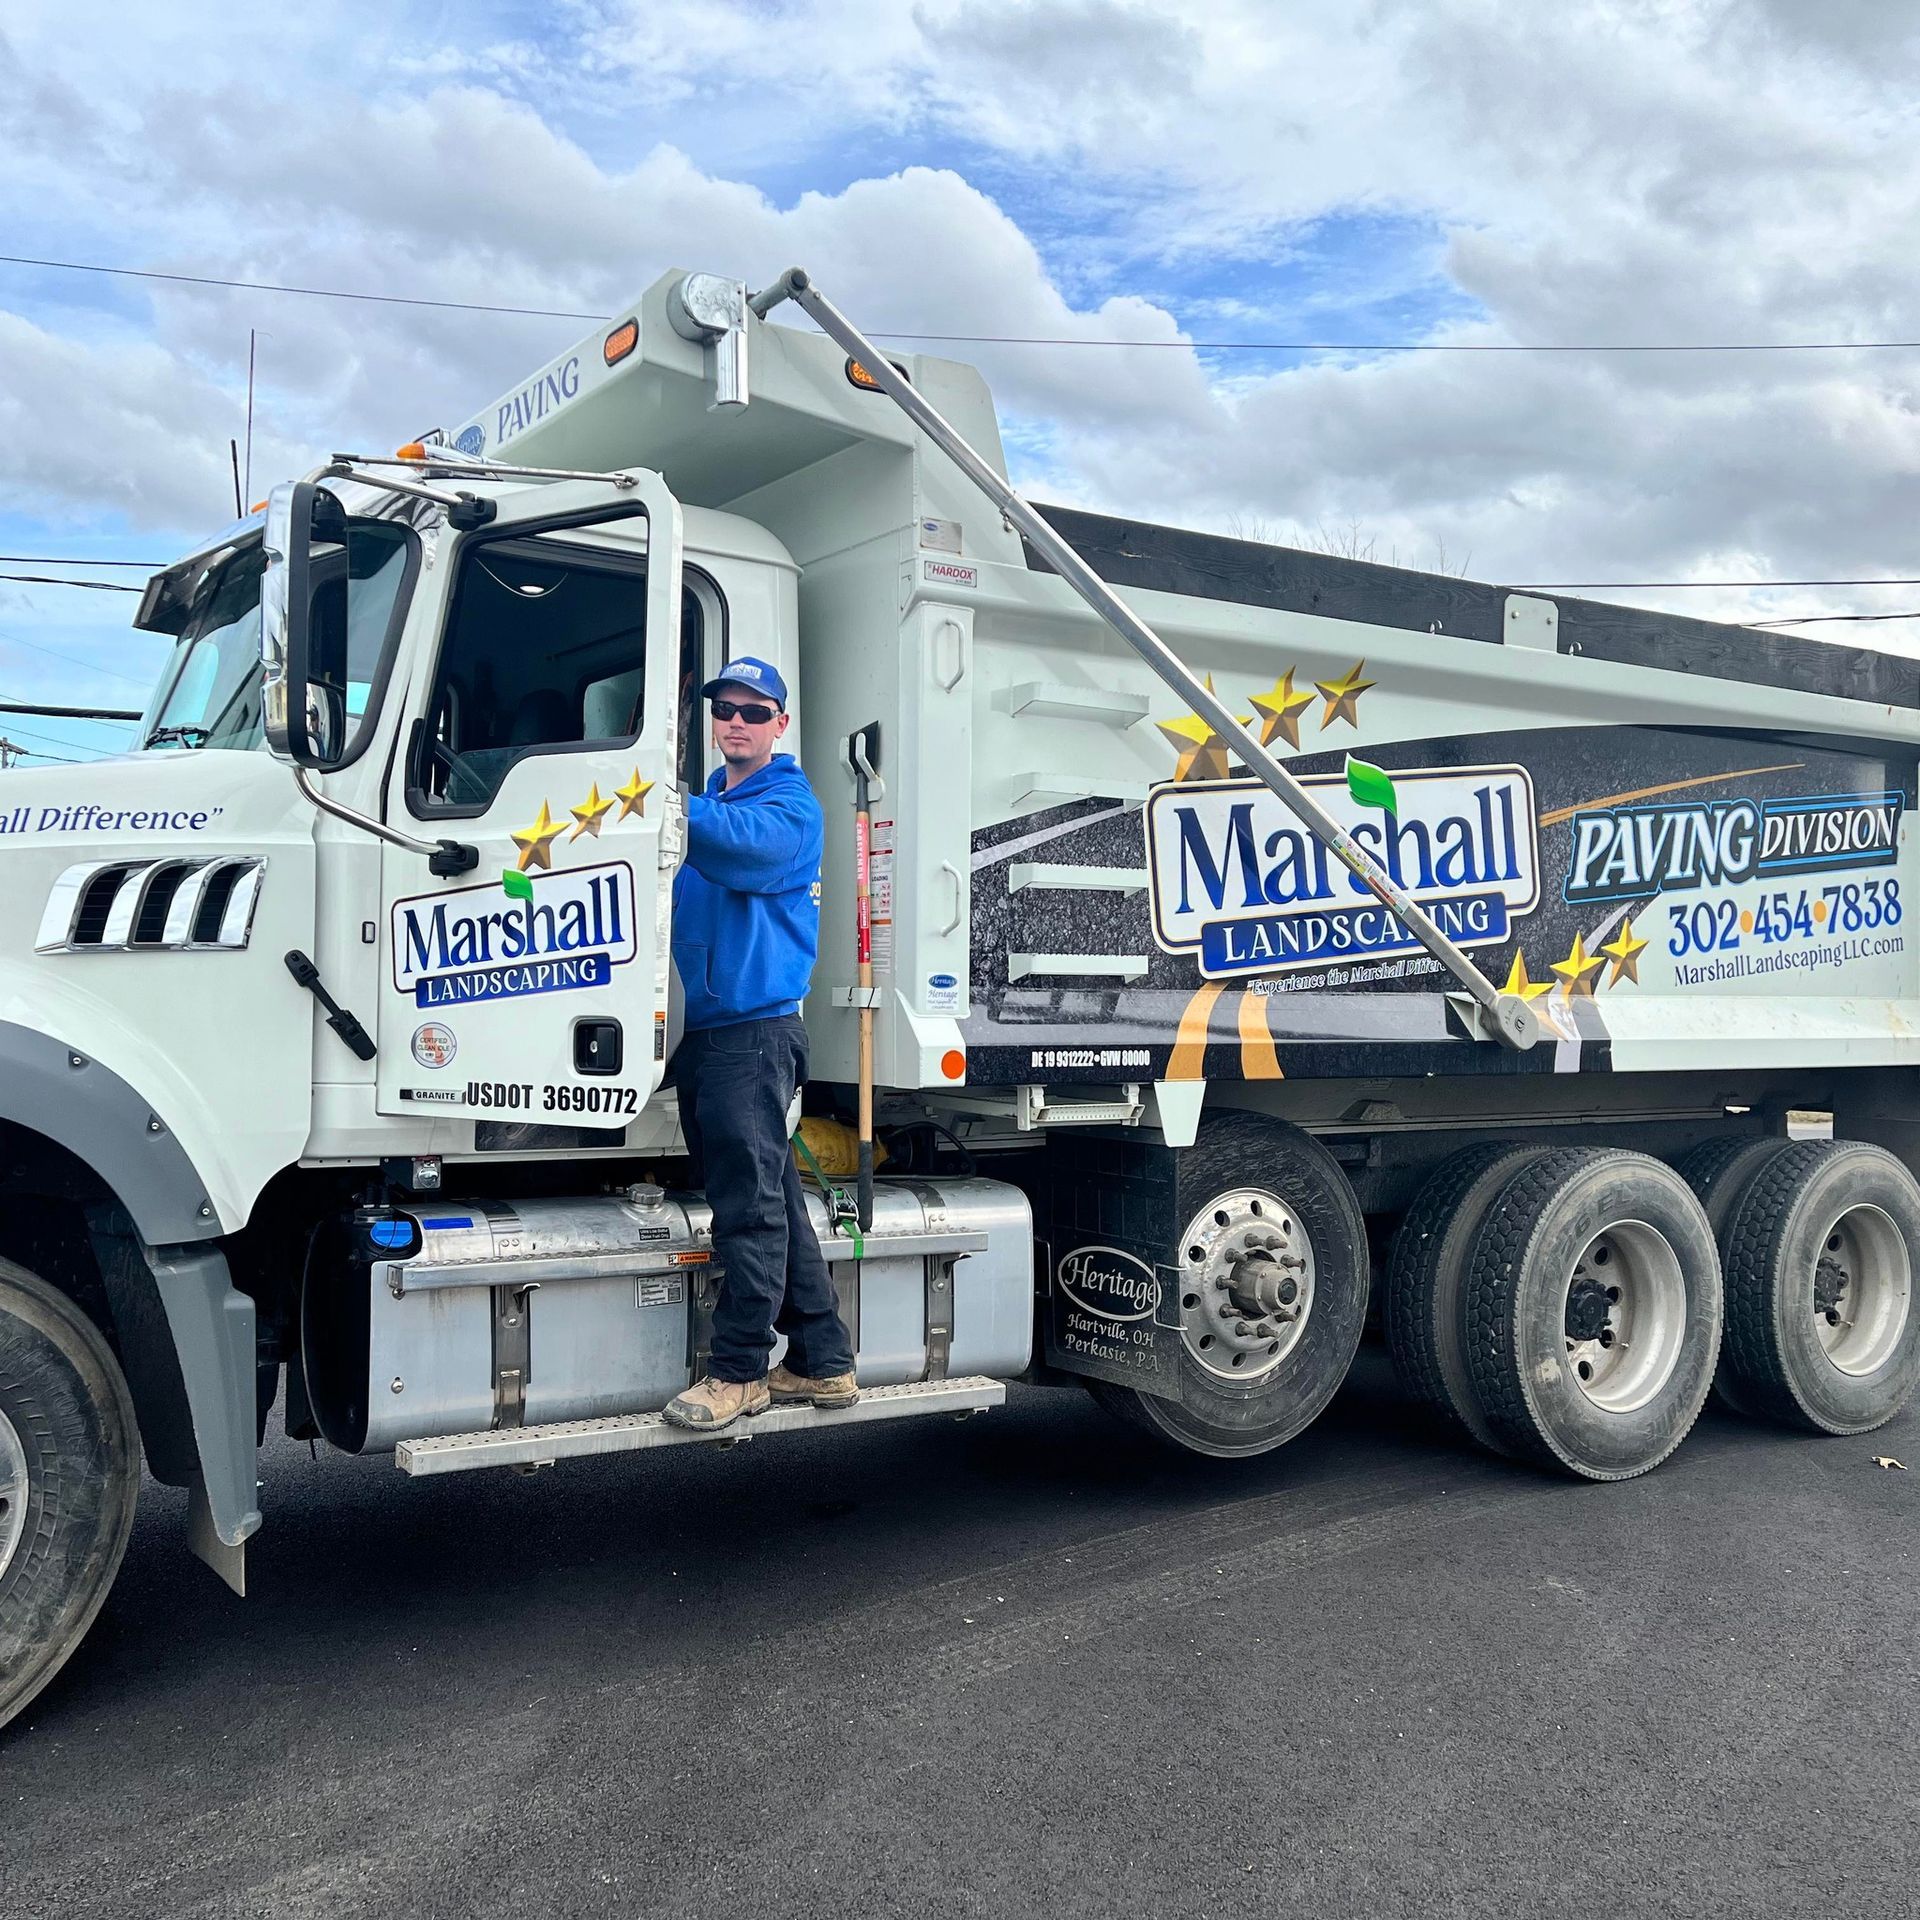 Professional lawn care team member from Marshall Landscaping standing proudly beside a well-maintained company truck in Wilmington, symbolizing reliable and prompt landscaping services.